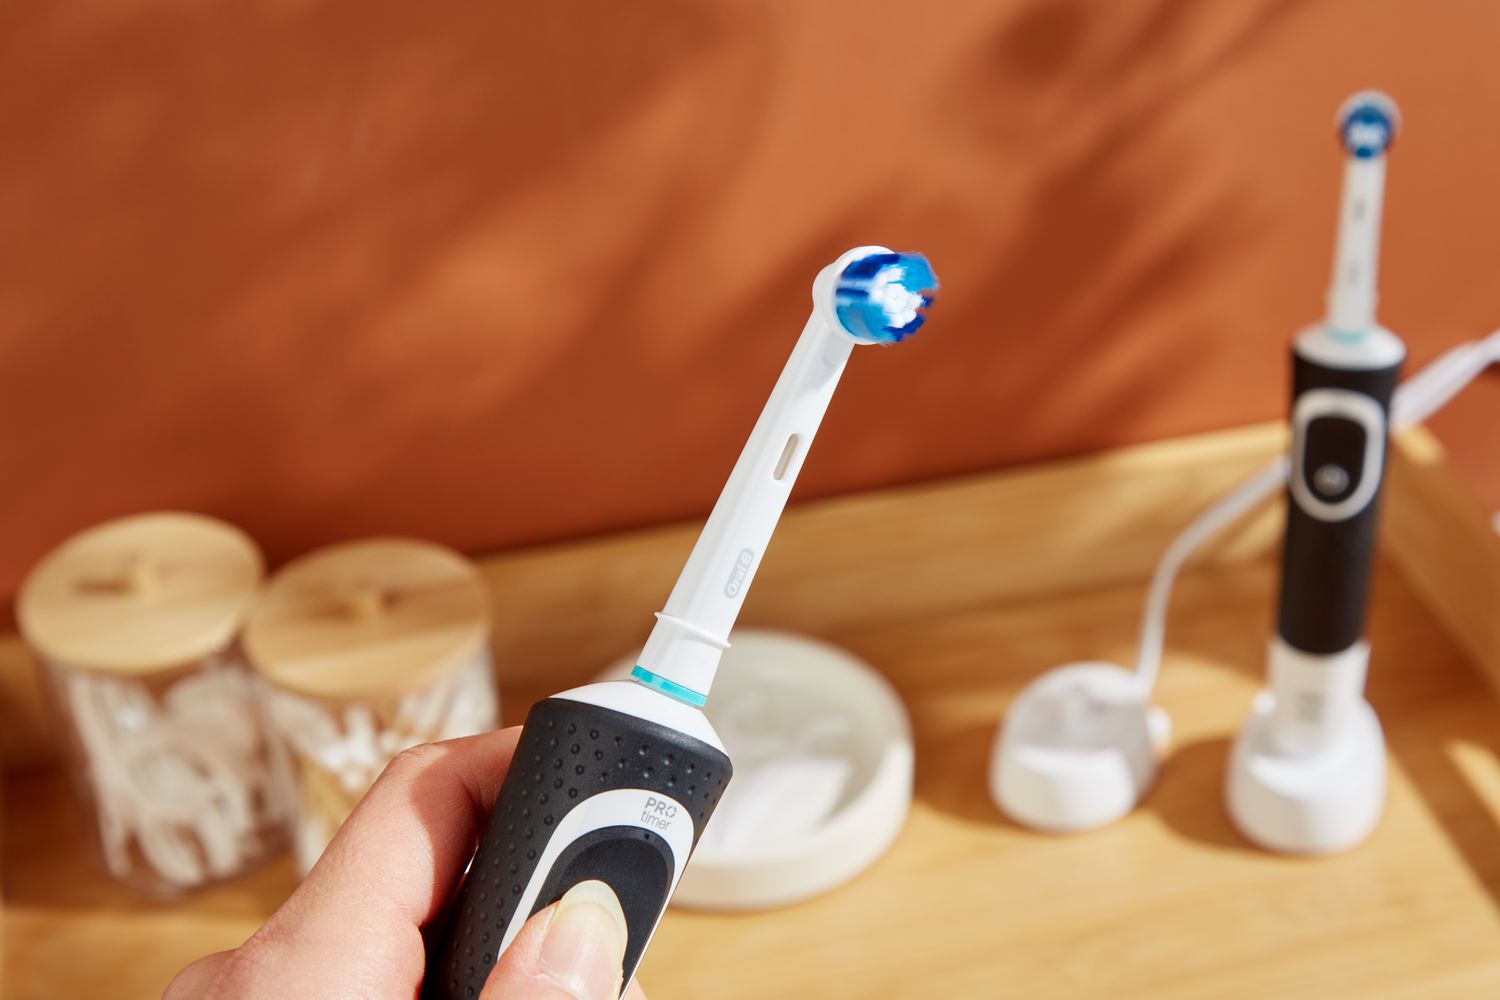 How Long Does An Oral-B Electric Toothbrush Last